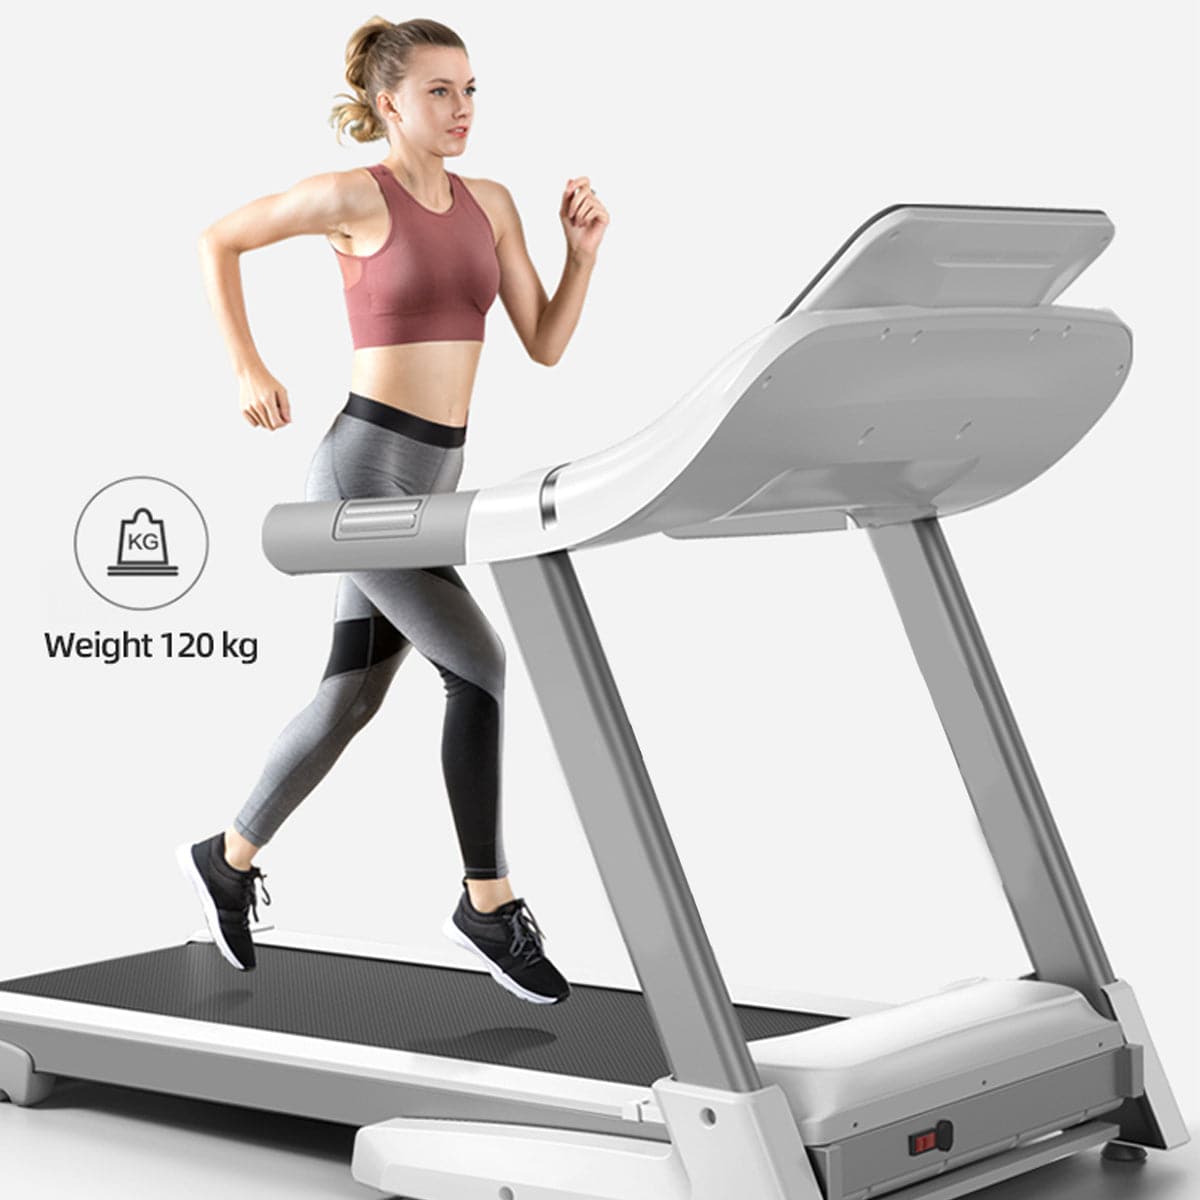 COOLBABY PBJ23 Premium Foldable Treadmill with 10.1" Touch Display - Quiet Motor, Spacious Running Area, and Hi-Fi Audio for Ultimate Cardio Experience - COOLBABY